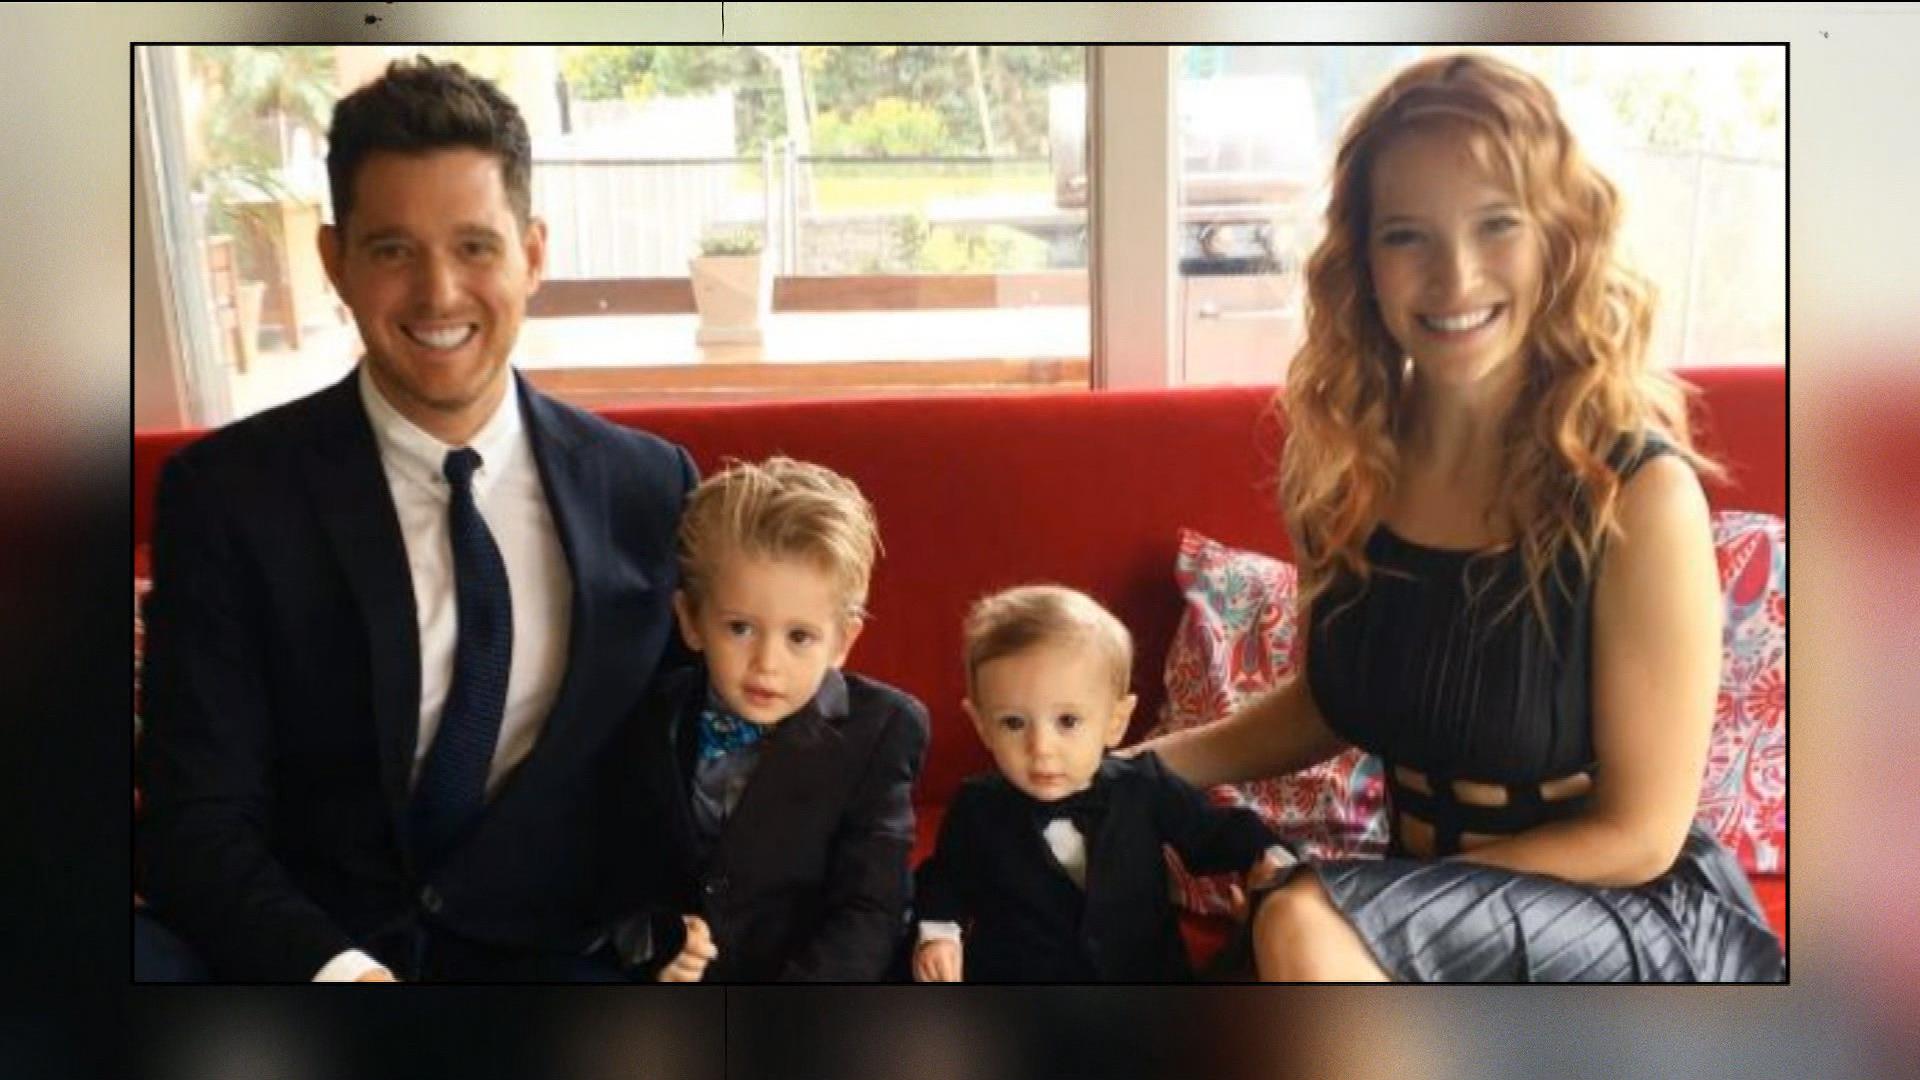 Michael Buble suspends his career after 3-year-old son diagnosed with cancer